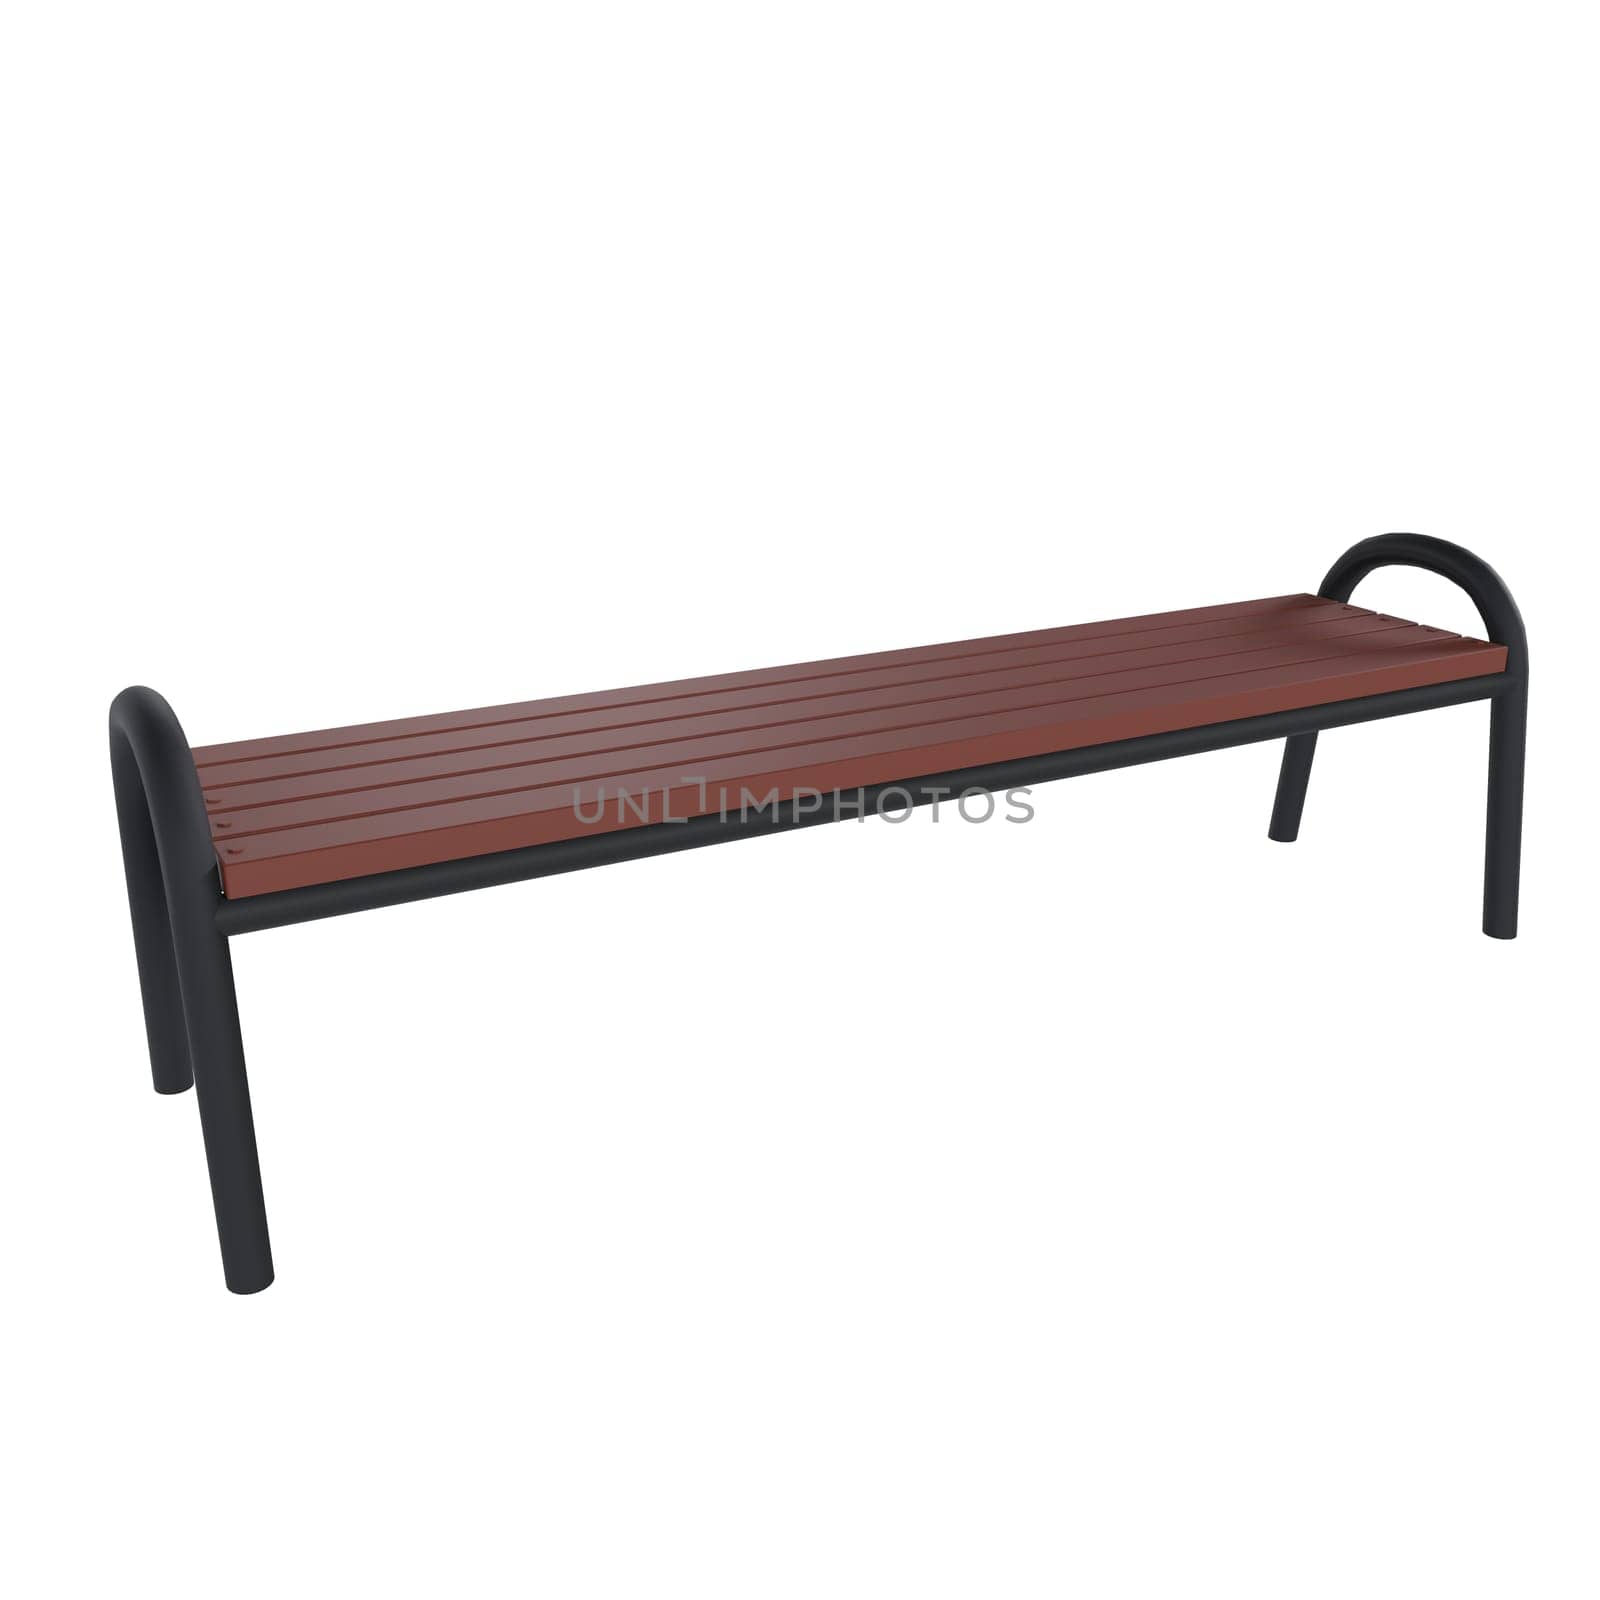 Park Bench isolated on white background. High quality 3d illustration